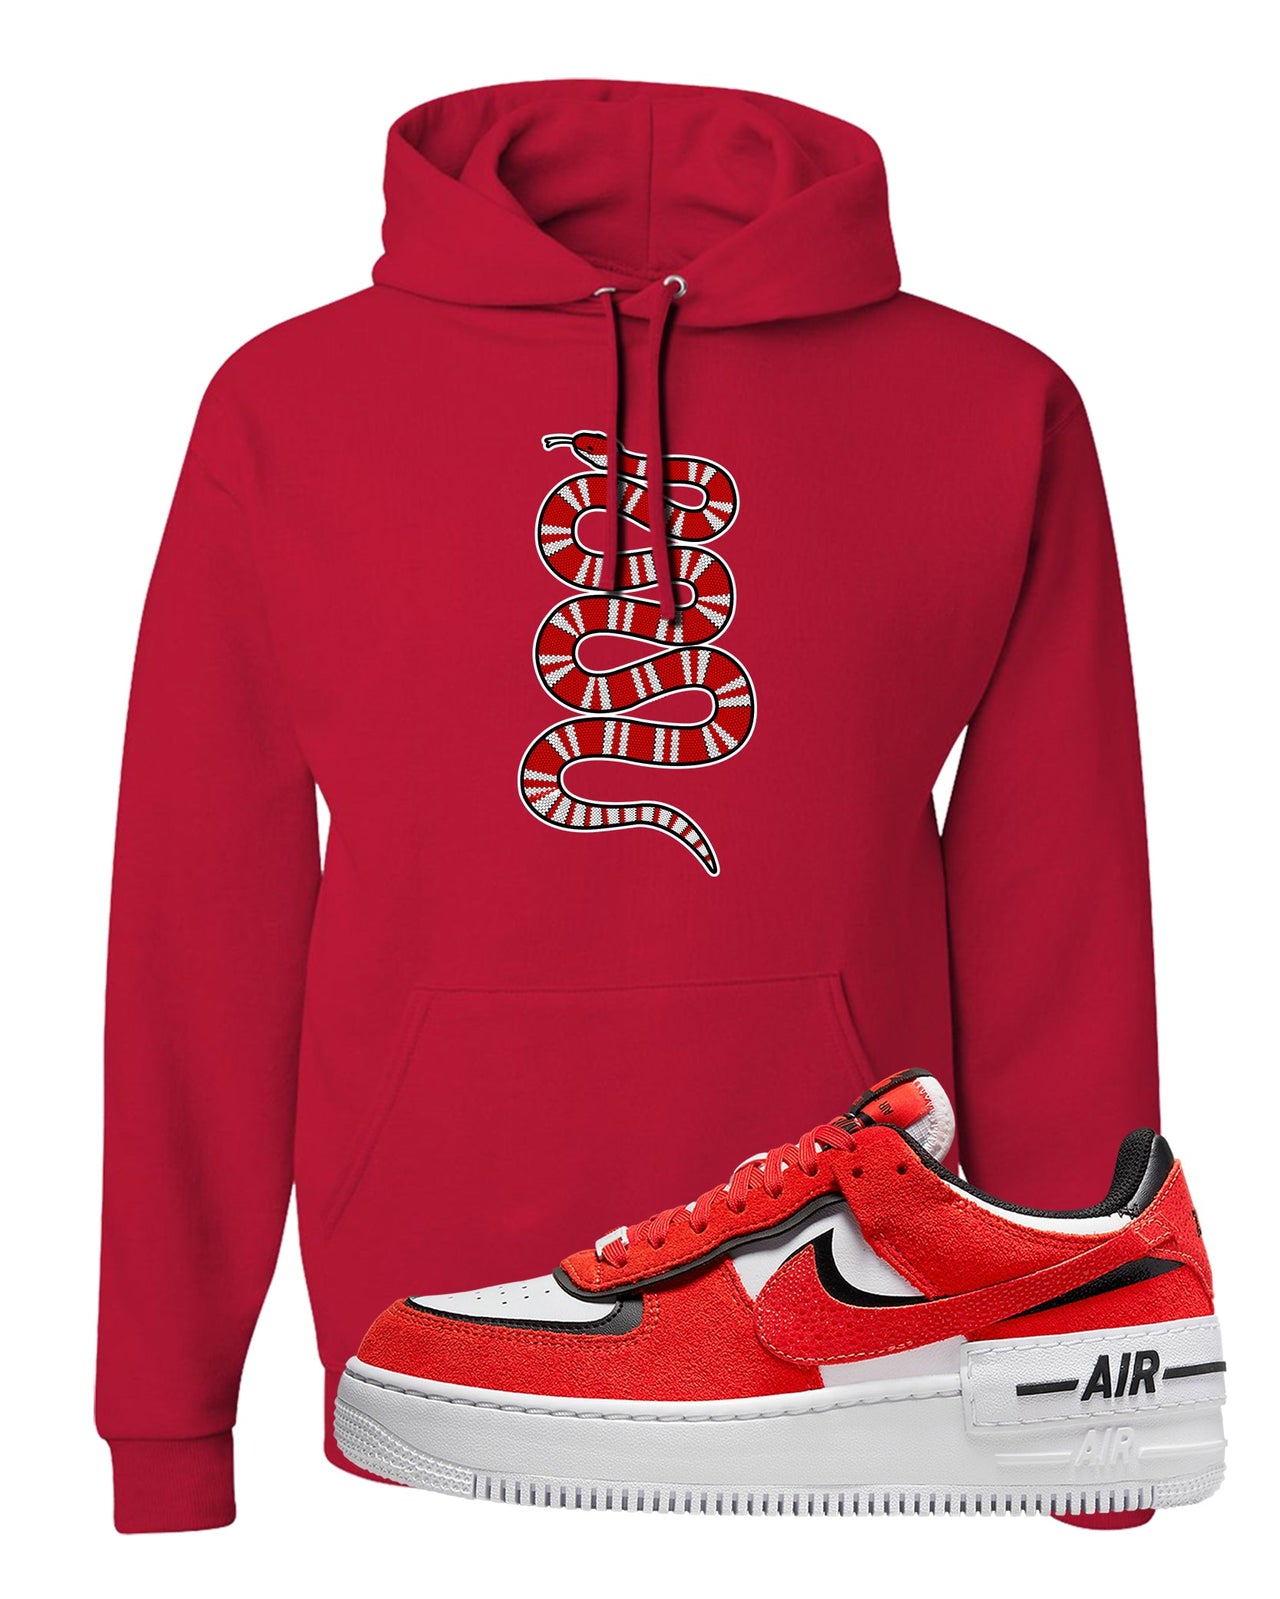 Shadow Chicago AF 1s Hoodie | Coiled Snake, Red